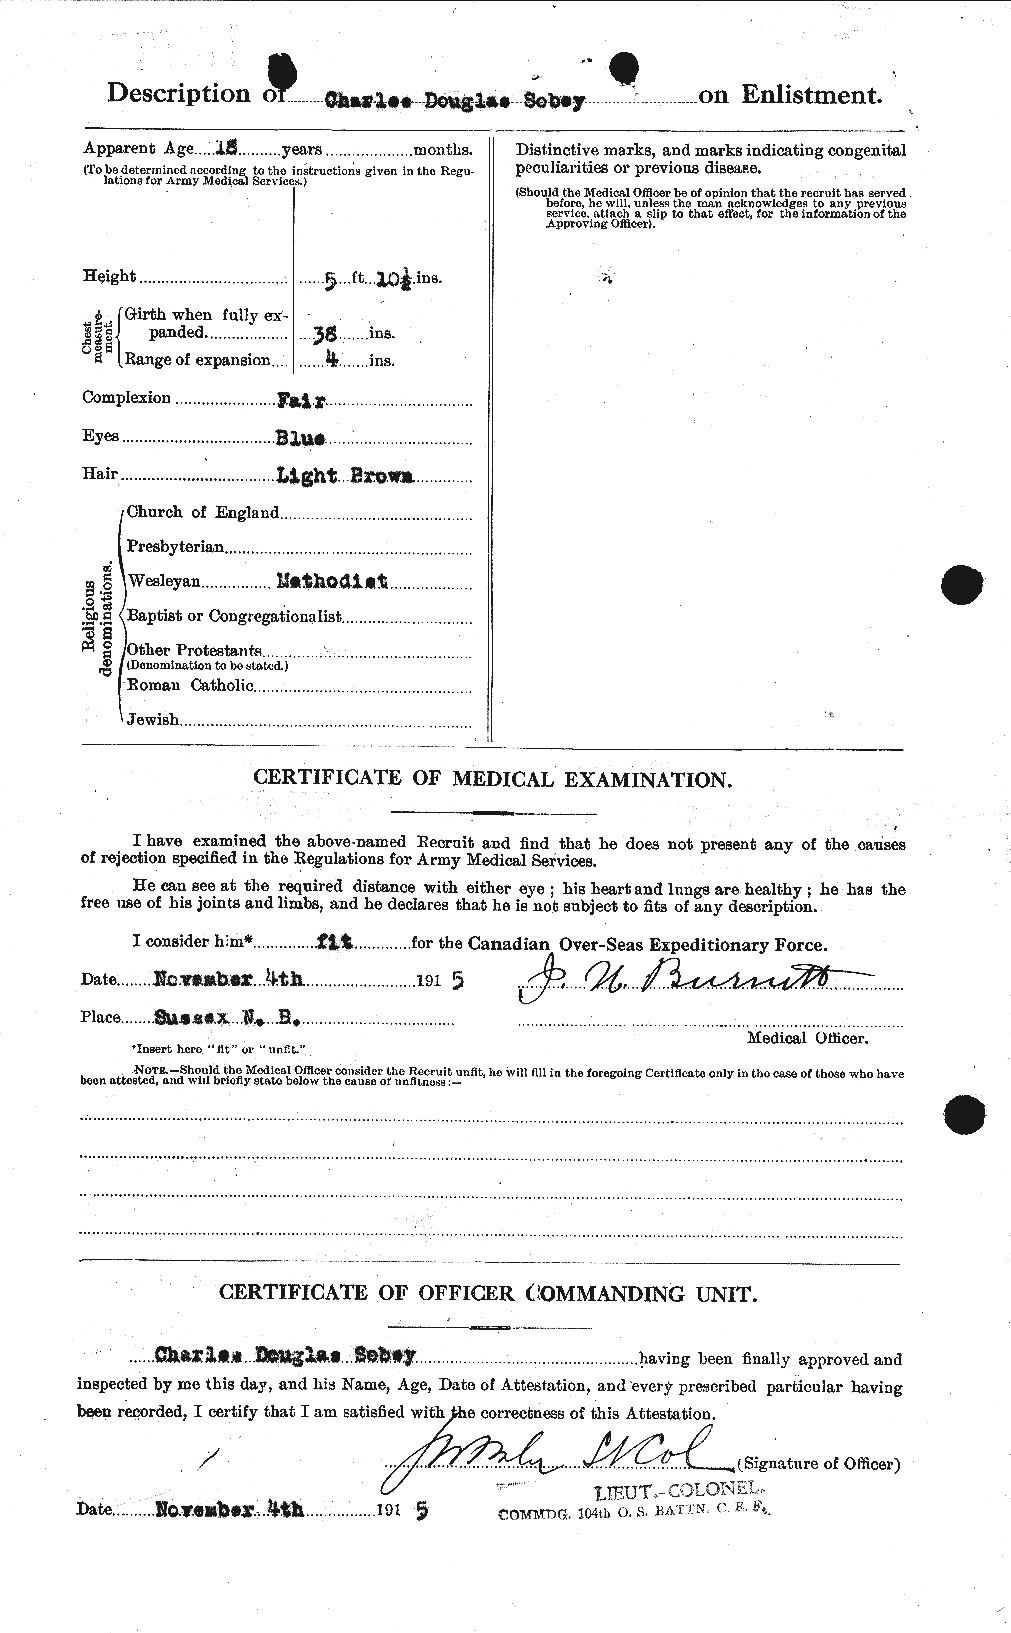 Personnel Records of the First World War - CEF 108634b